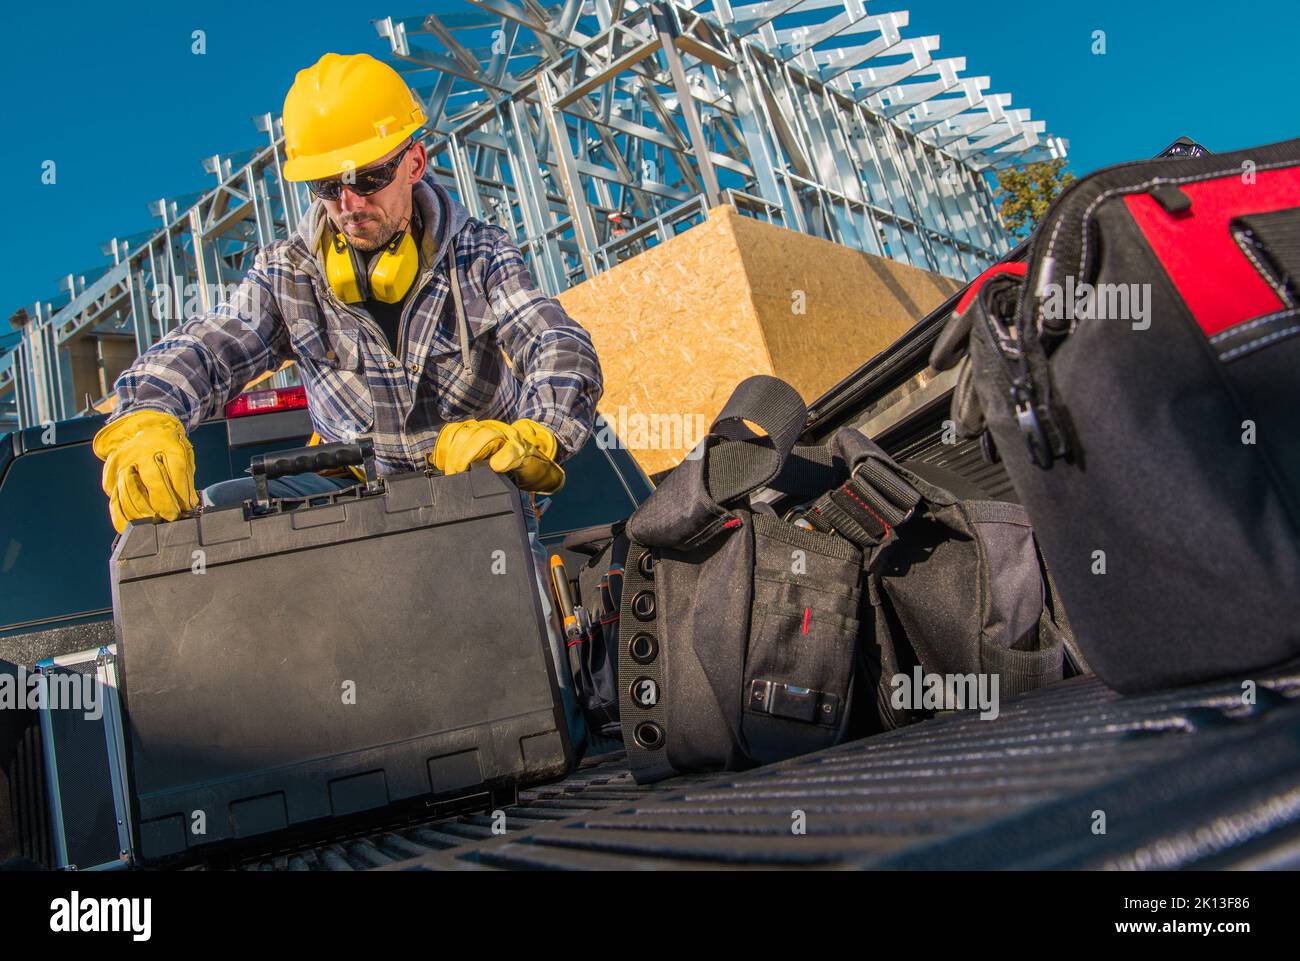 Caucasian Middle Aged Construction Worker Packing His Professional Equipment and Working Tools Into the Cargo Beg of Black Pickup Truck. Residential B Stock Photo